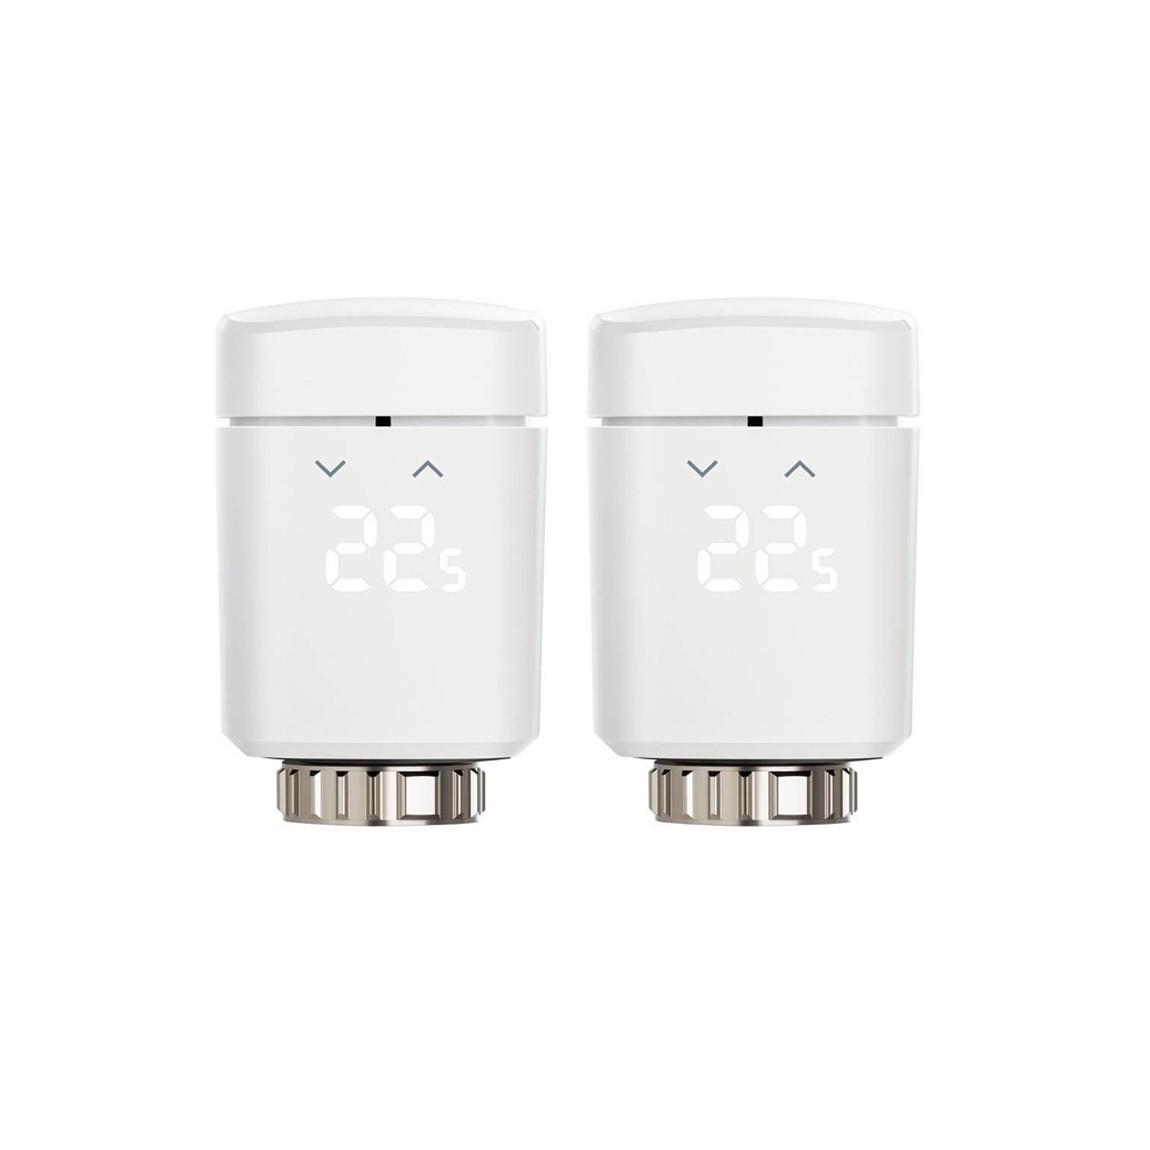 Eve Thermo 2er-Pack - Heizkörper-Thermostat mit Display & Touchbedienfeld